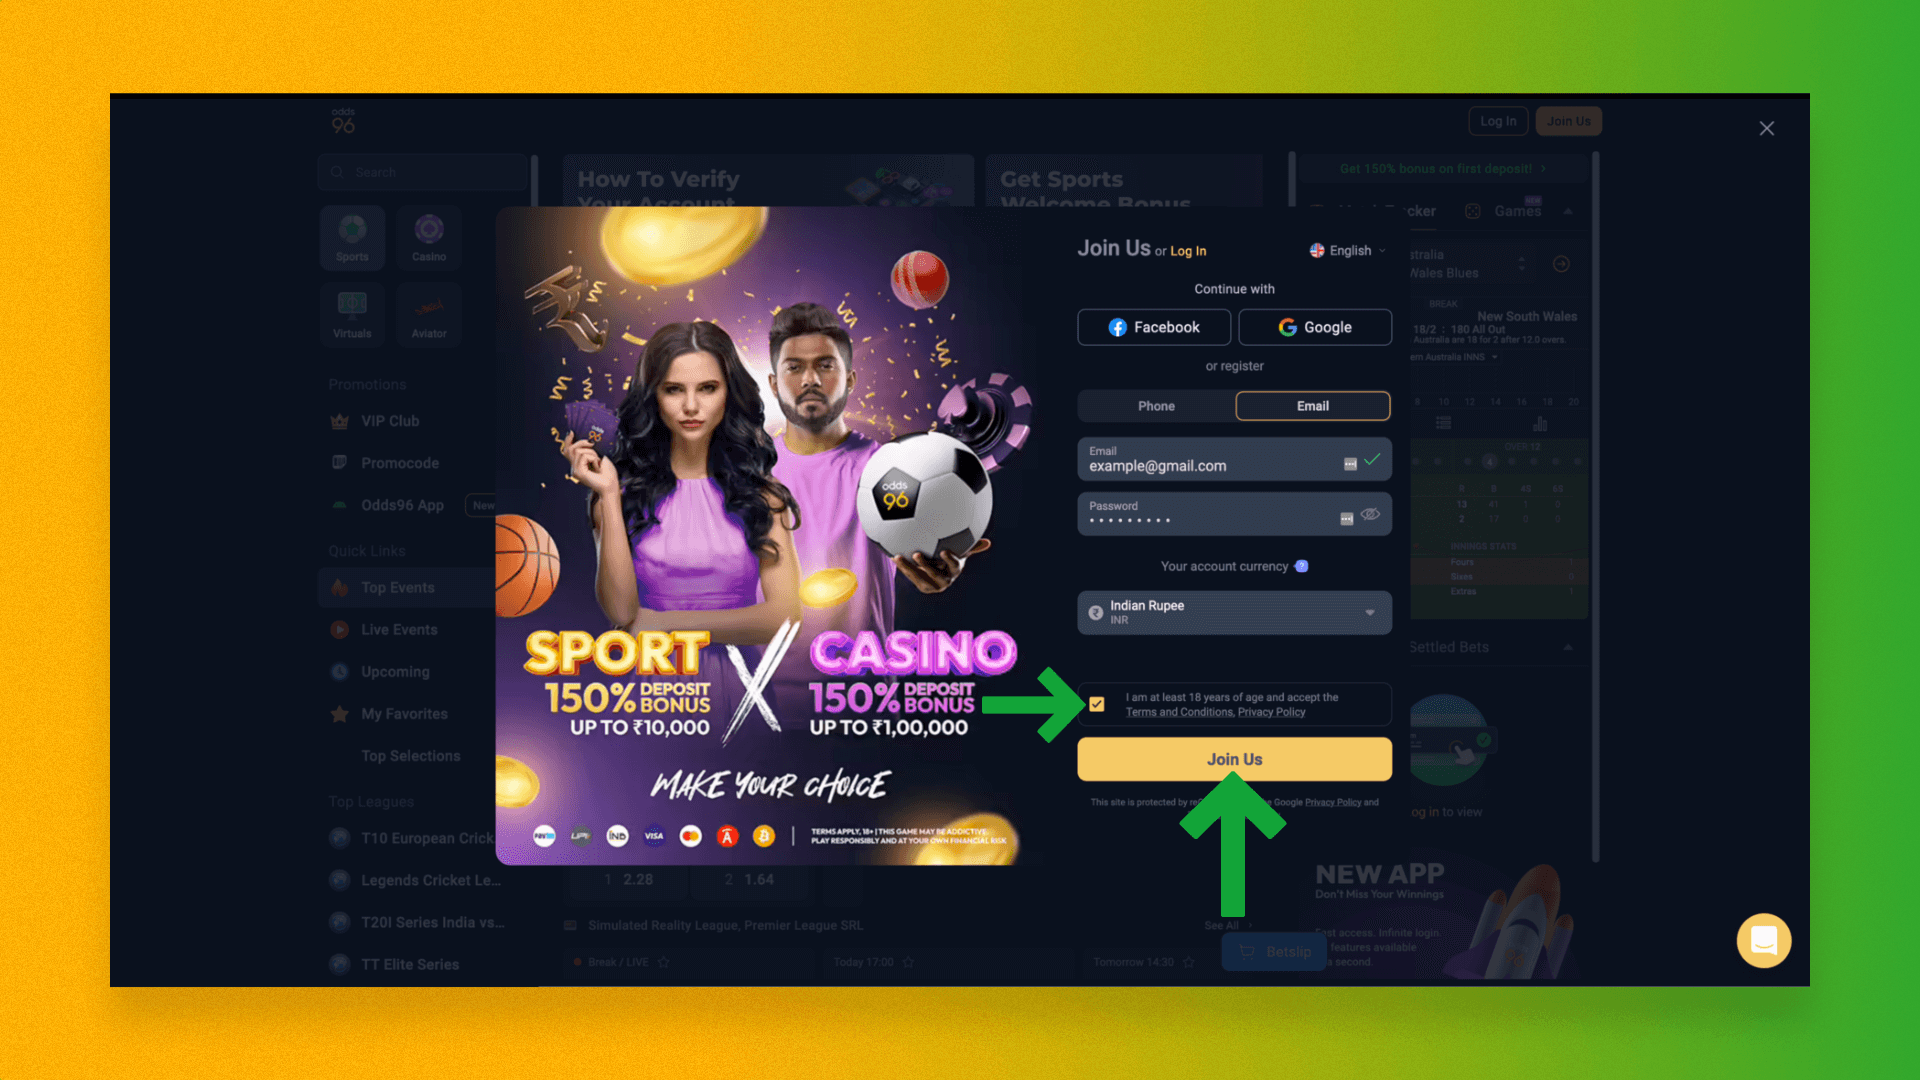 To complete the creation in Odds96 you need to confirm the registration